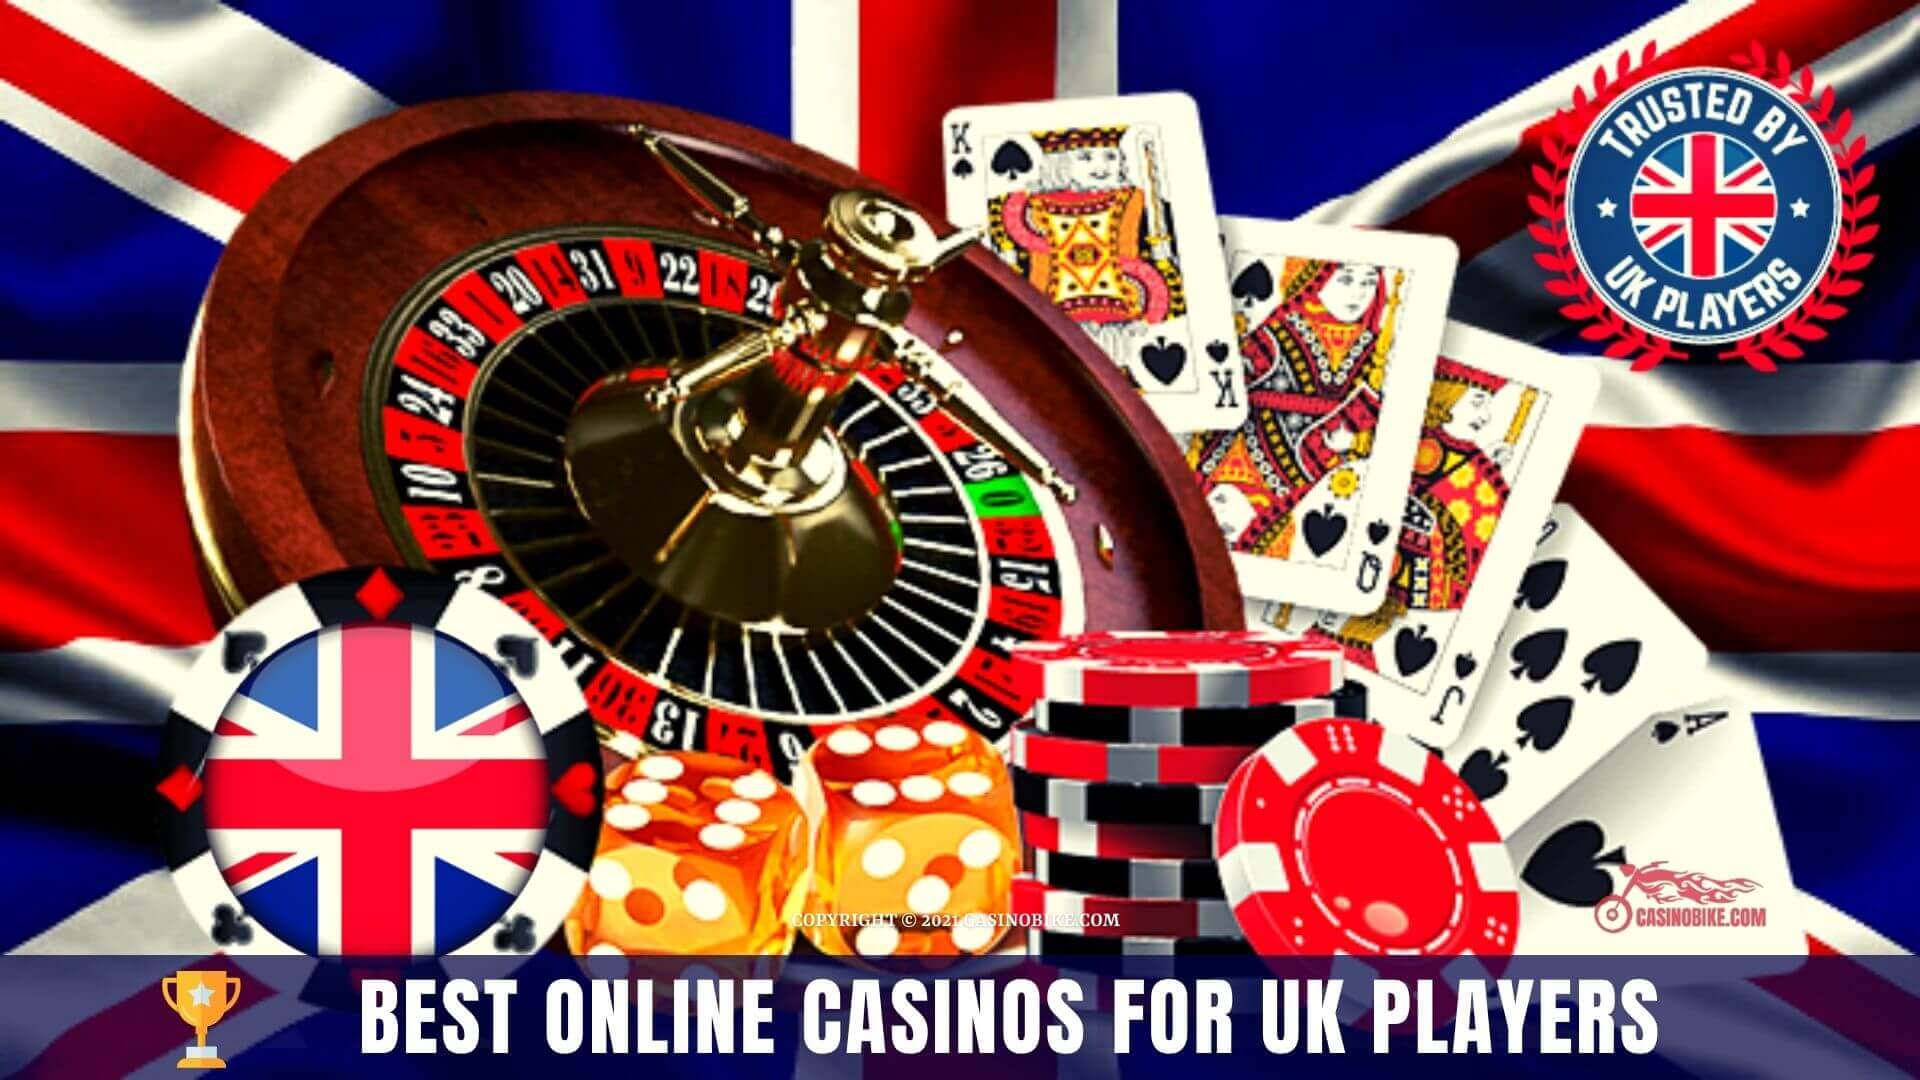 Best Make new online casino uk You Will Read This Year